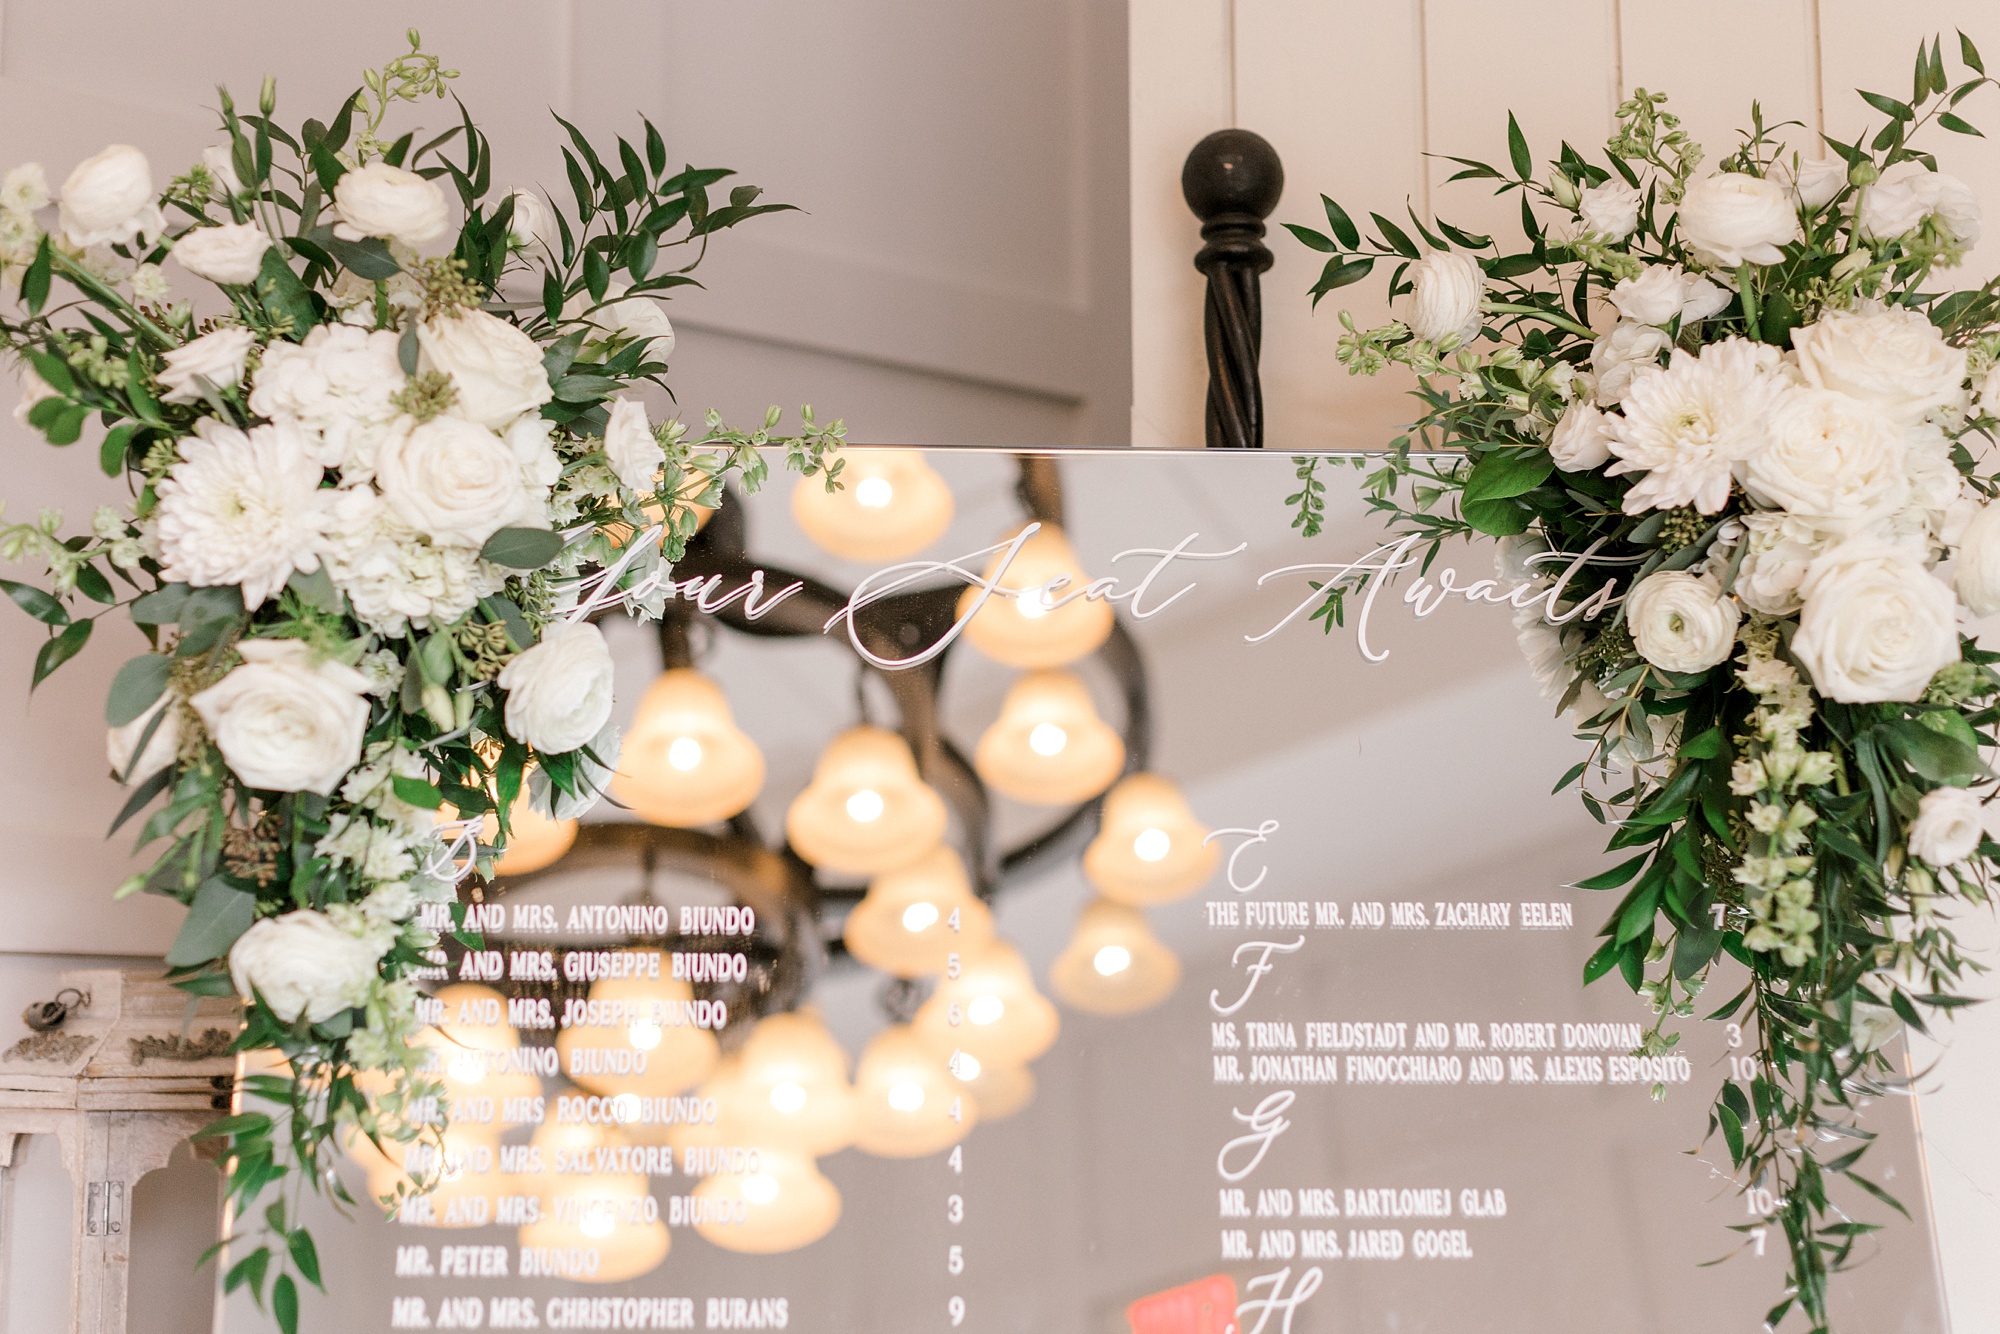 seating chart on mirror with white flowers along top